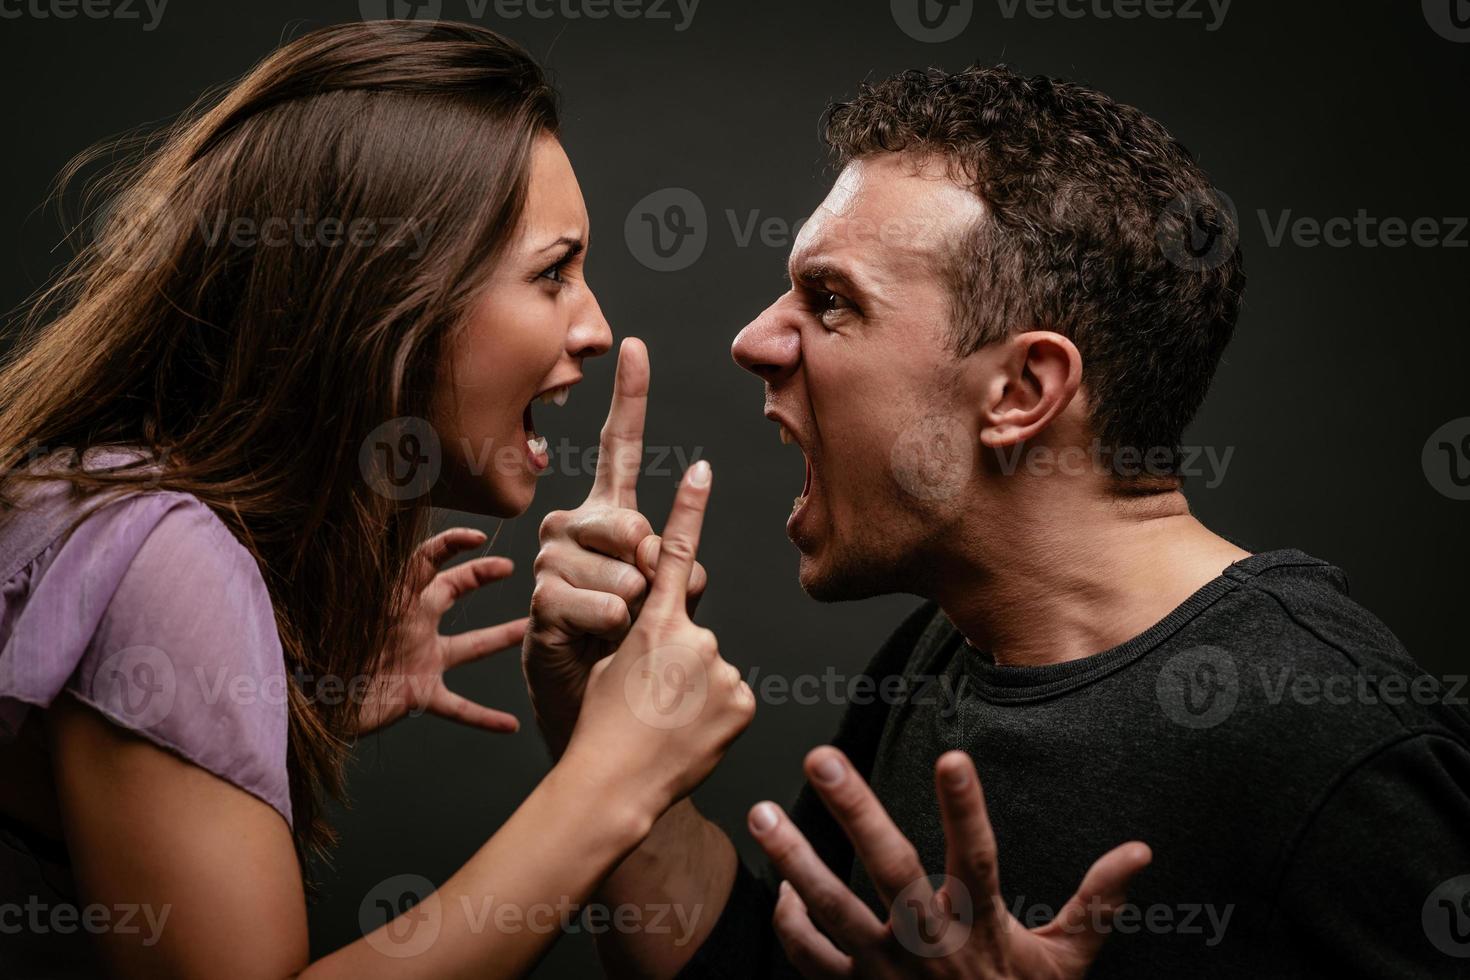 Angry Couple view photo